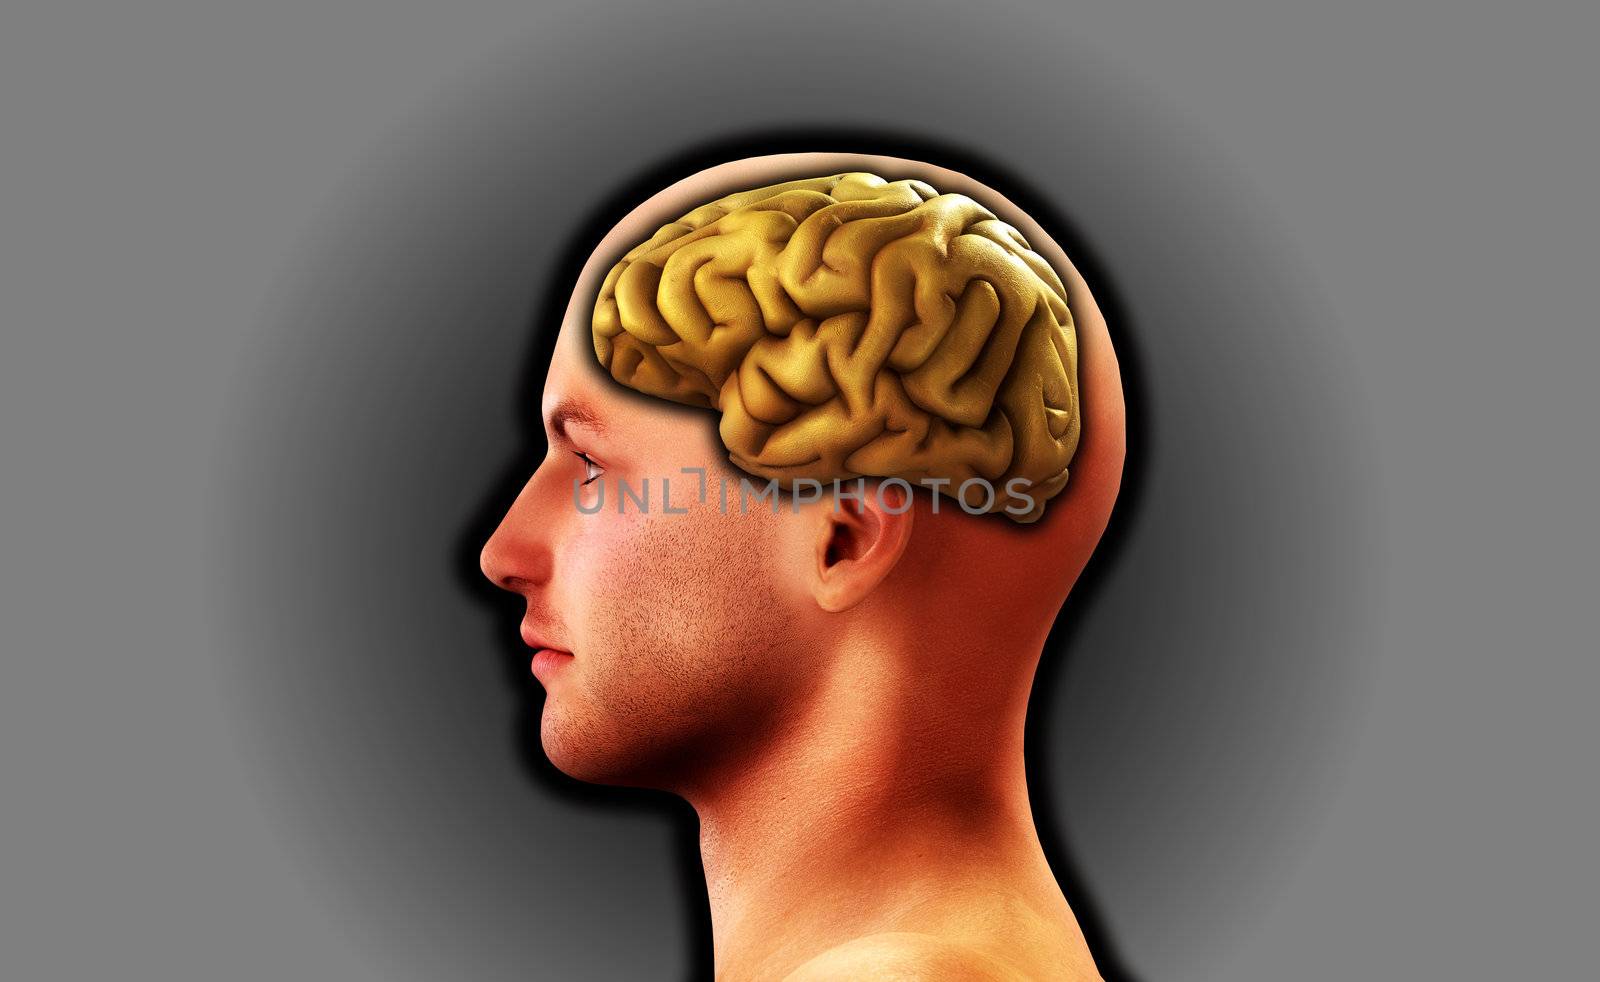 
Image of a mans head, for thought and medical concepts.